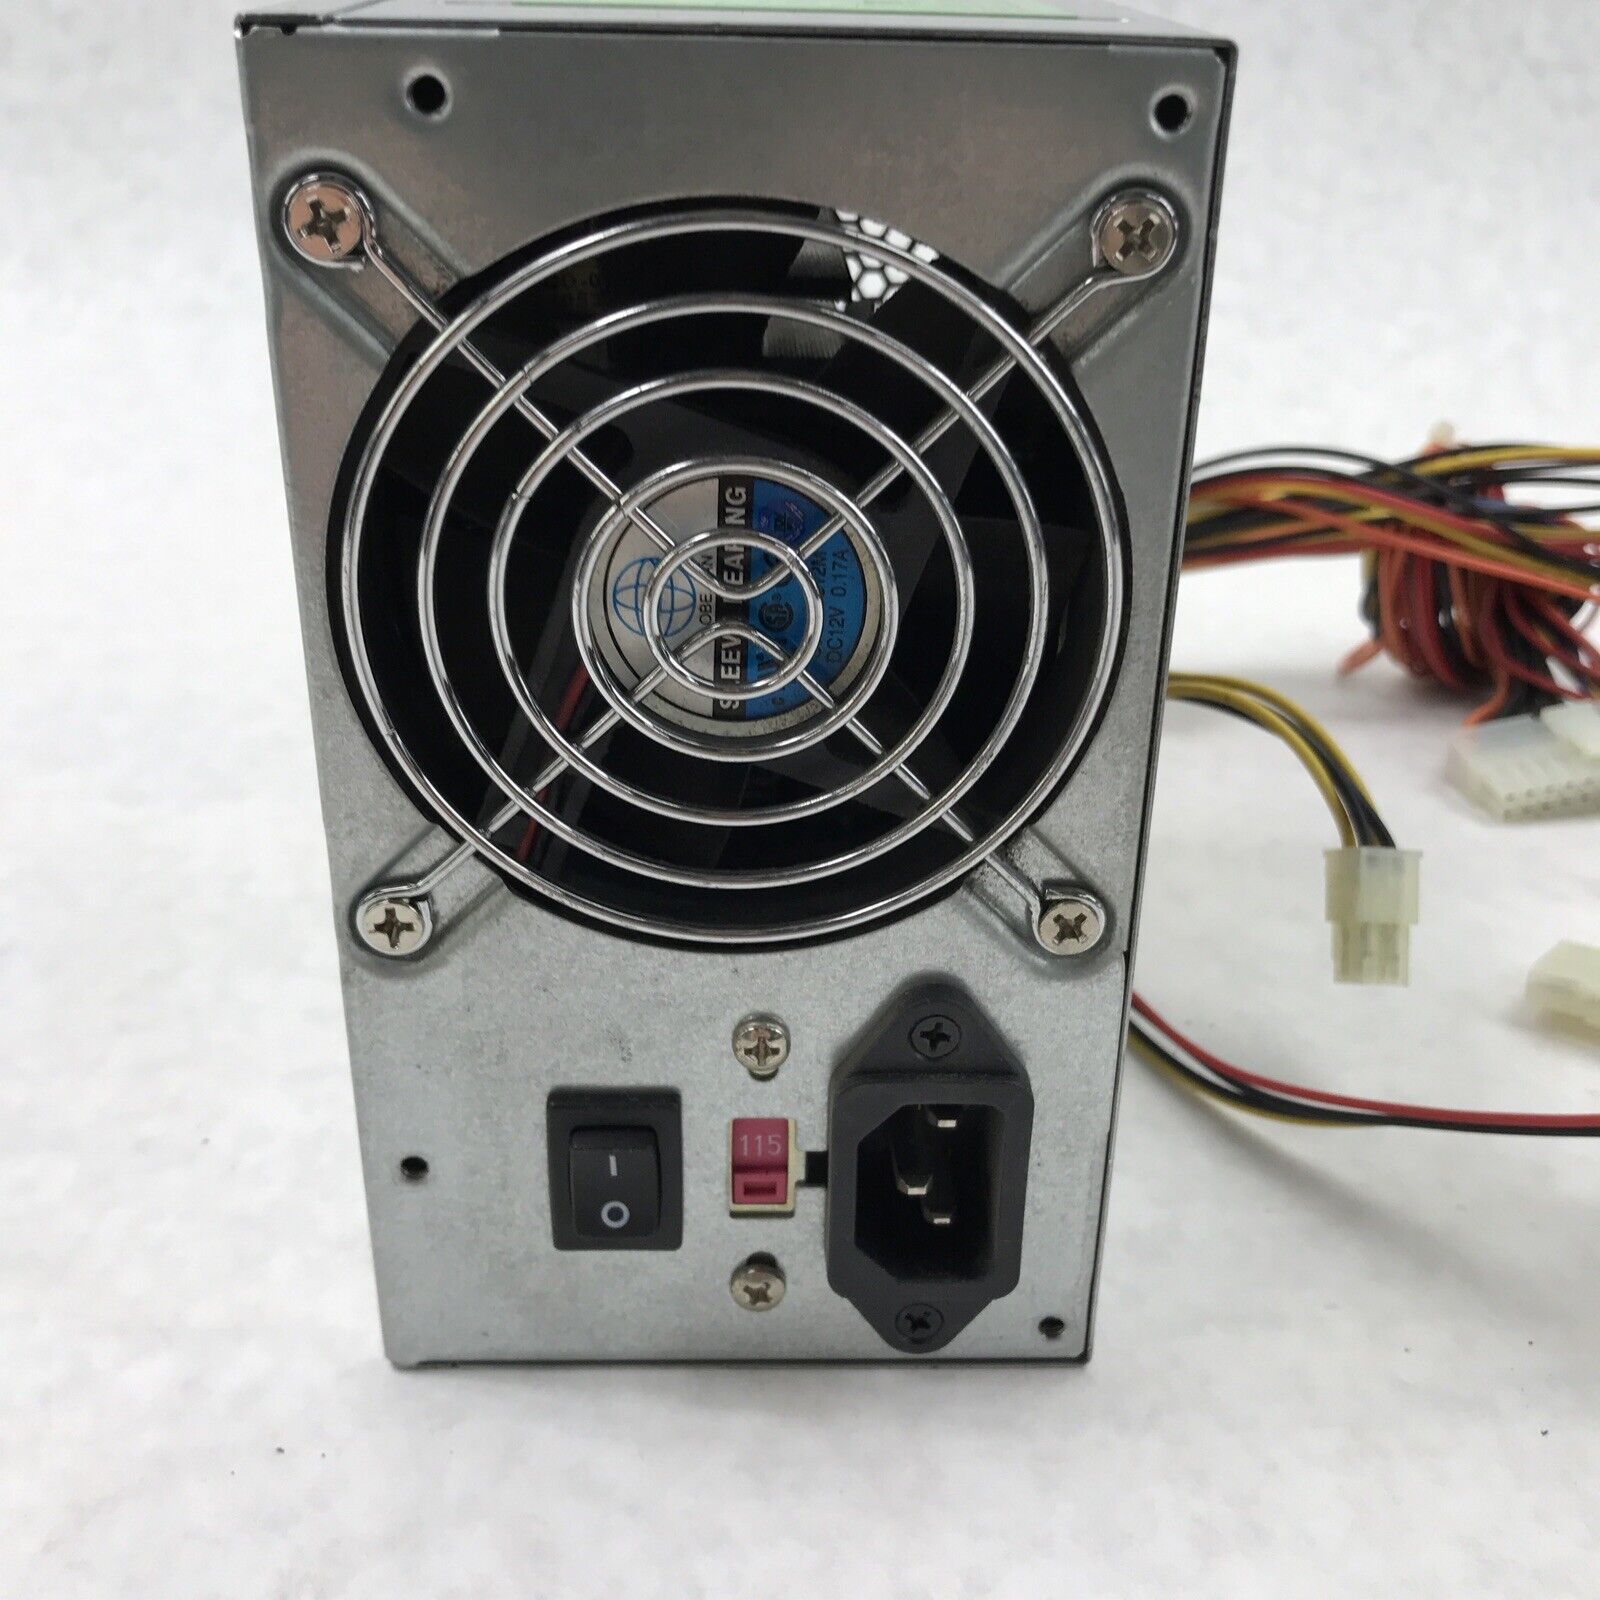 Allieo AL-C350ATX 350W 60Hz 230V Power Supply (Tested and Working)